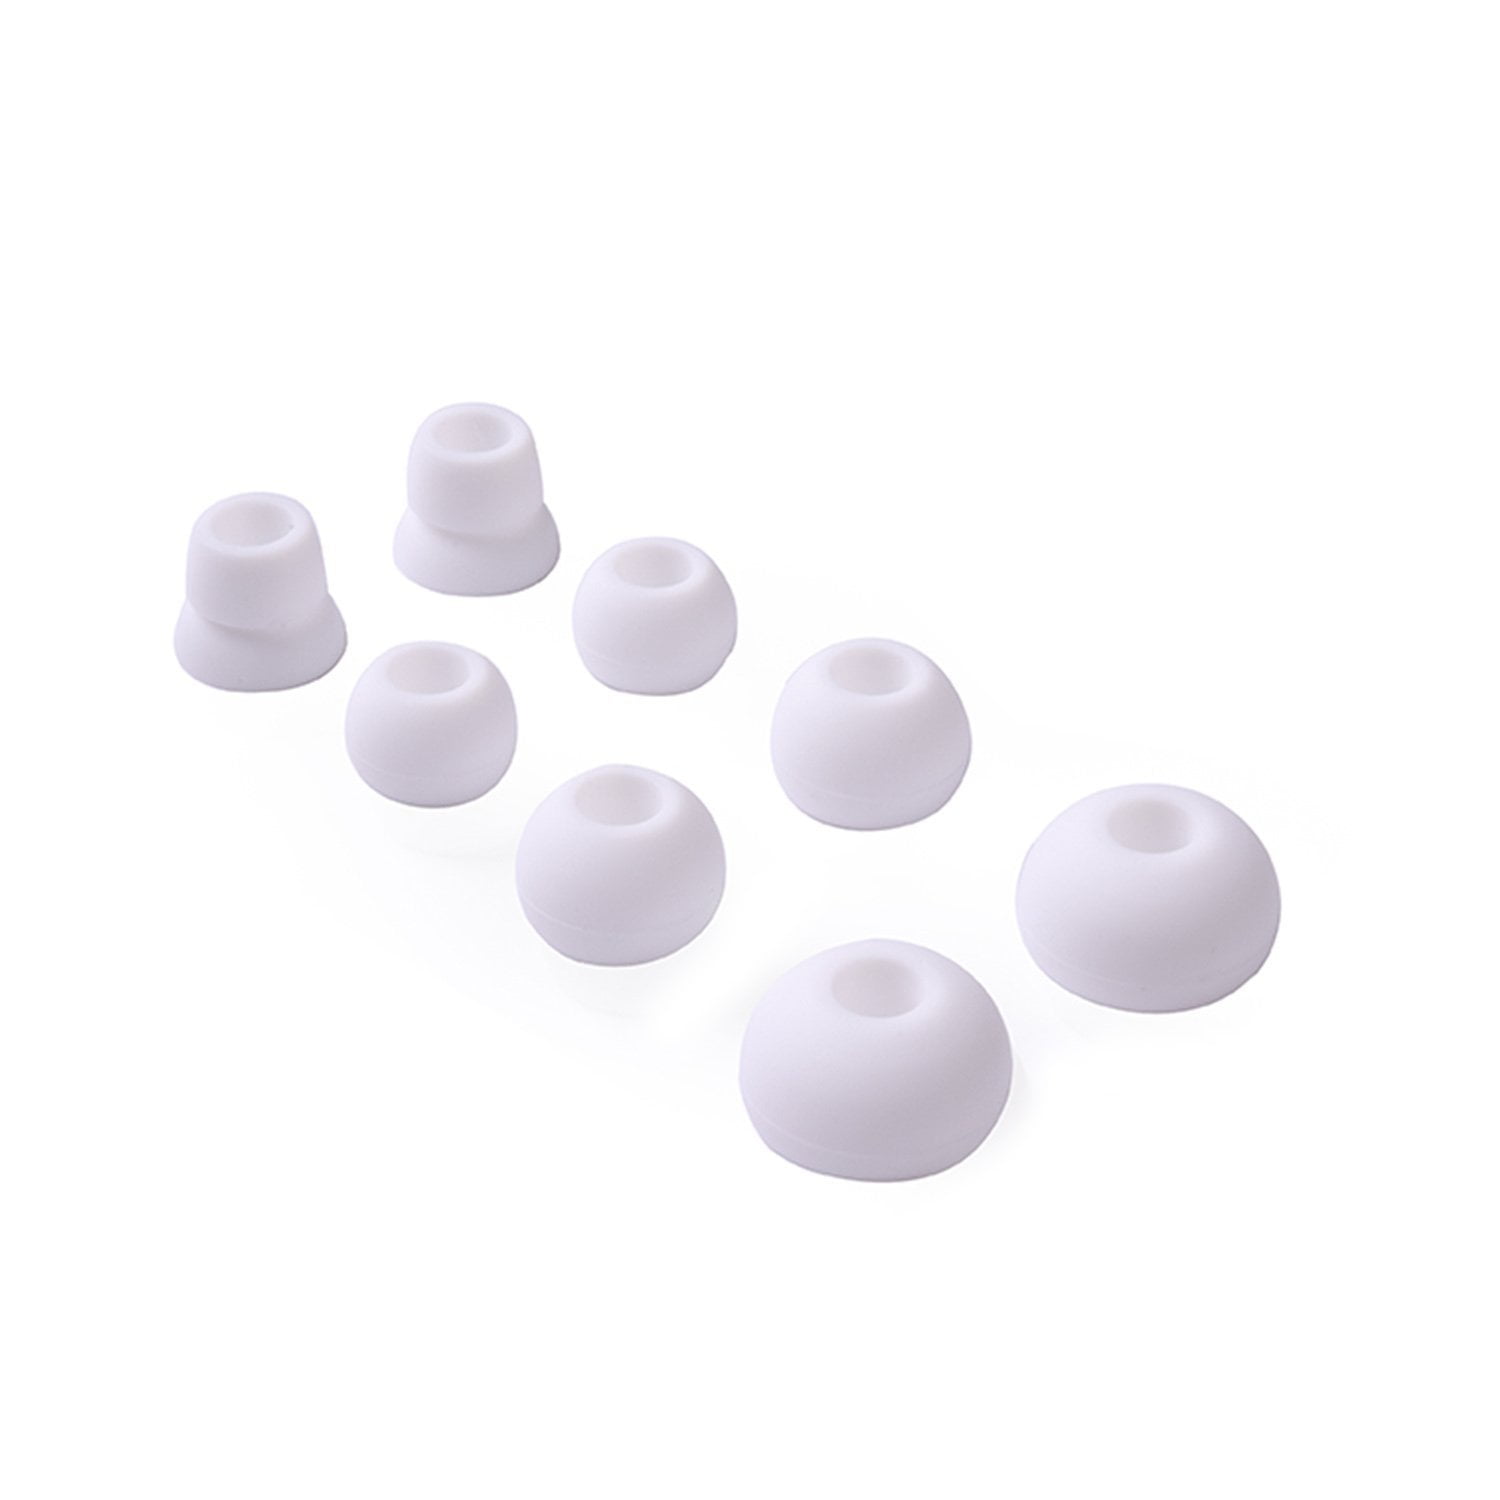 White Replacement Earbud Tips for Beats 